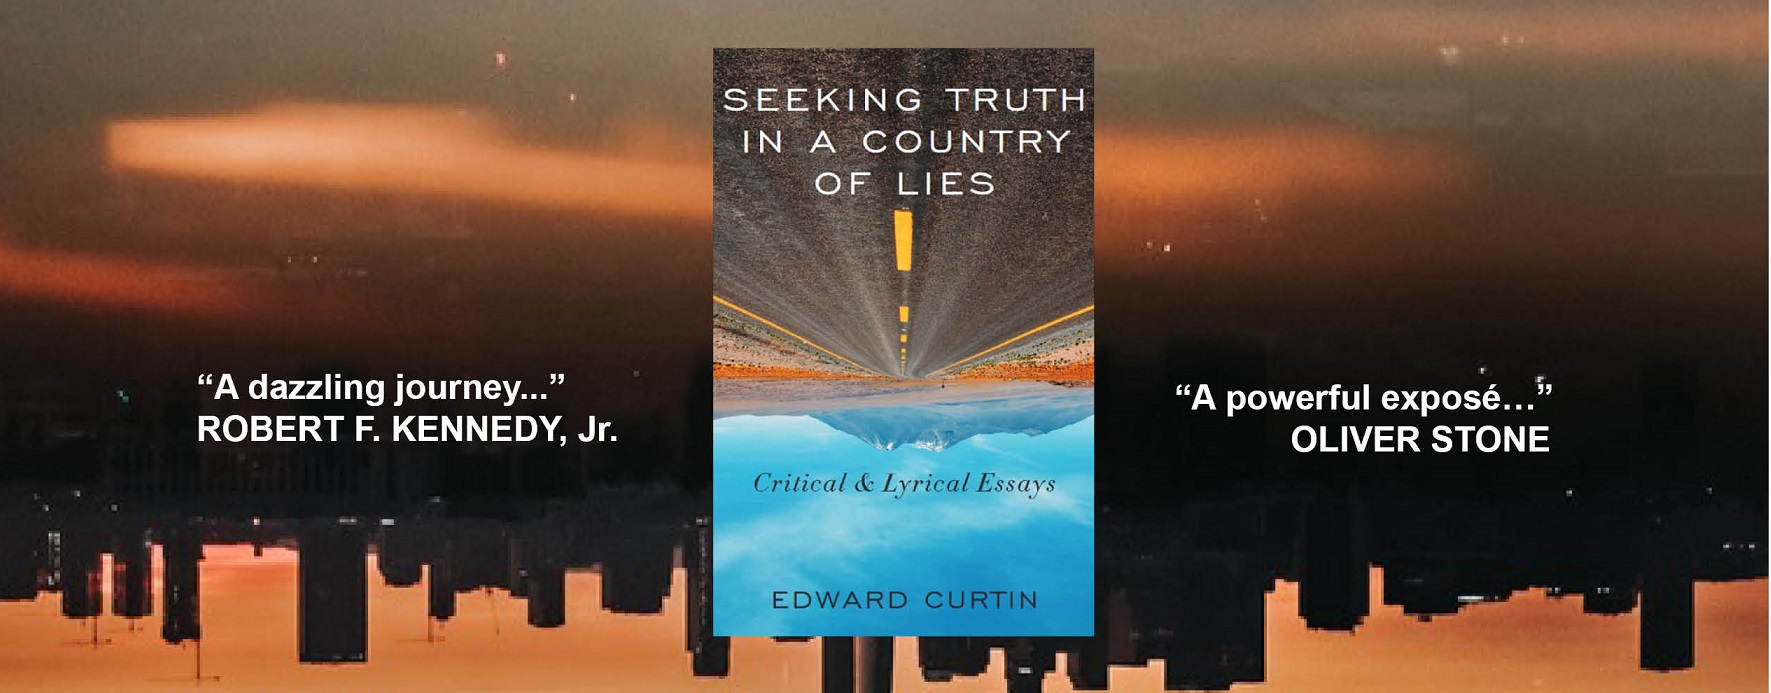 An Invitation to Seeking Truth in a Country of Lies